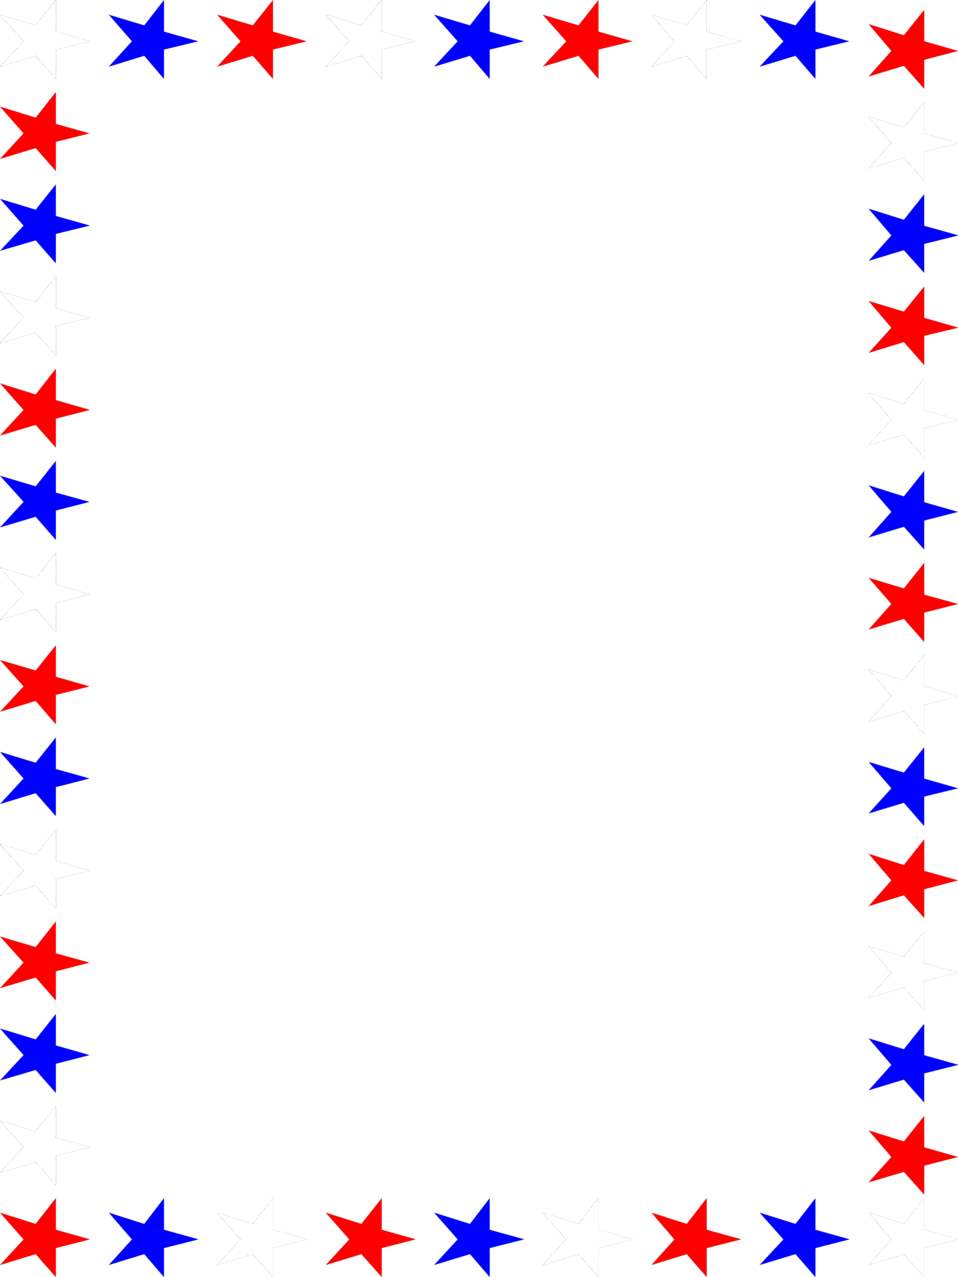 Elegant Star Border Clipart Picture - Red White And Blue Border (958x1277)